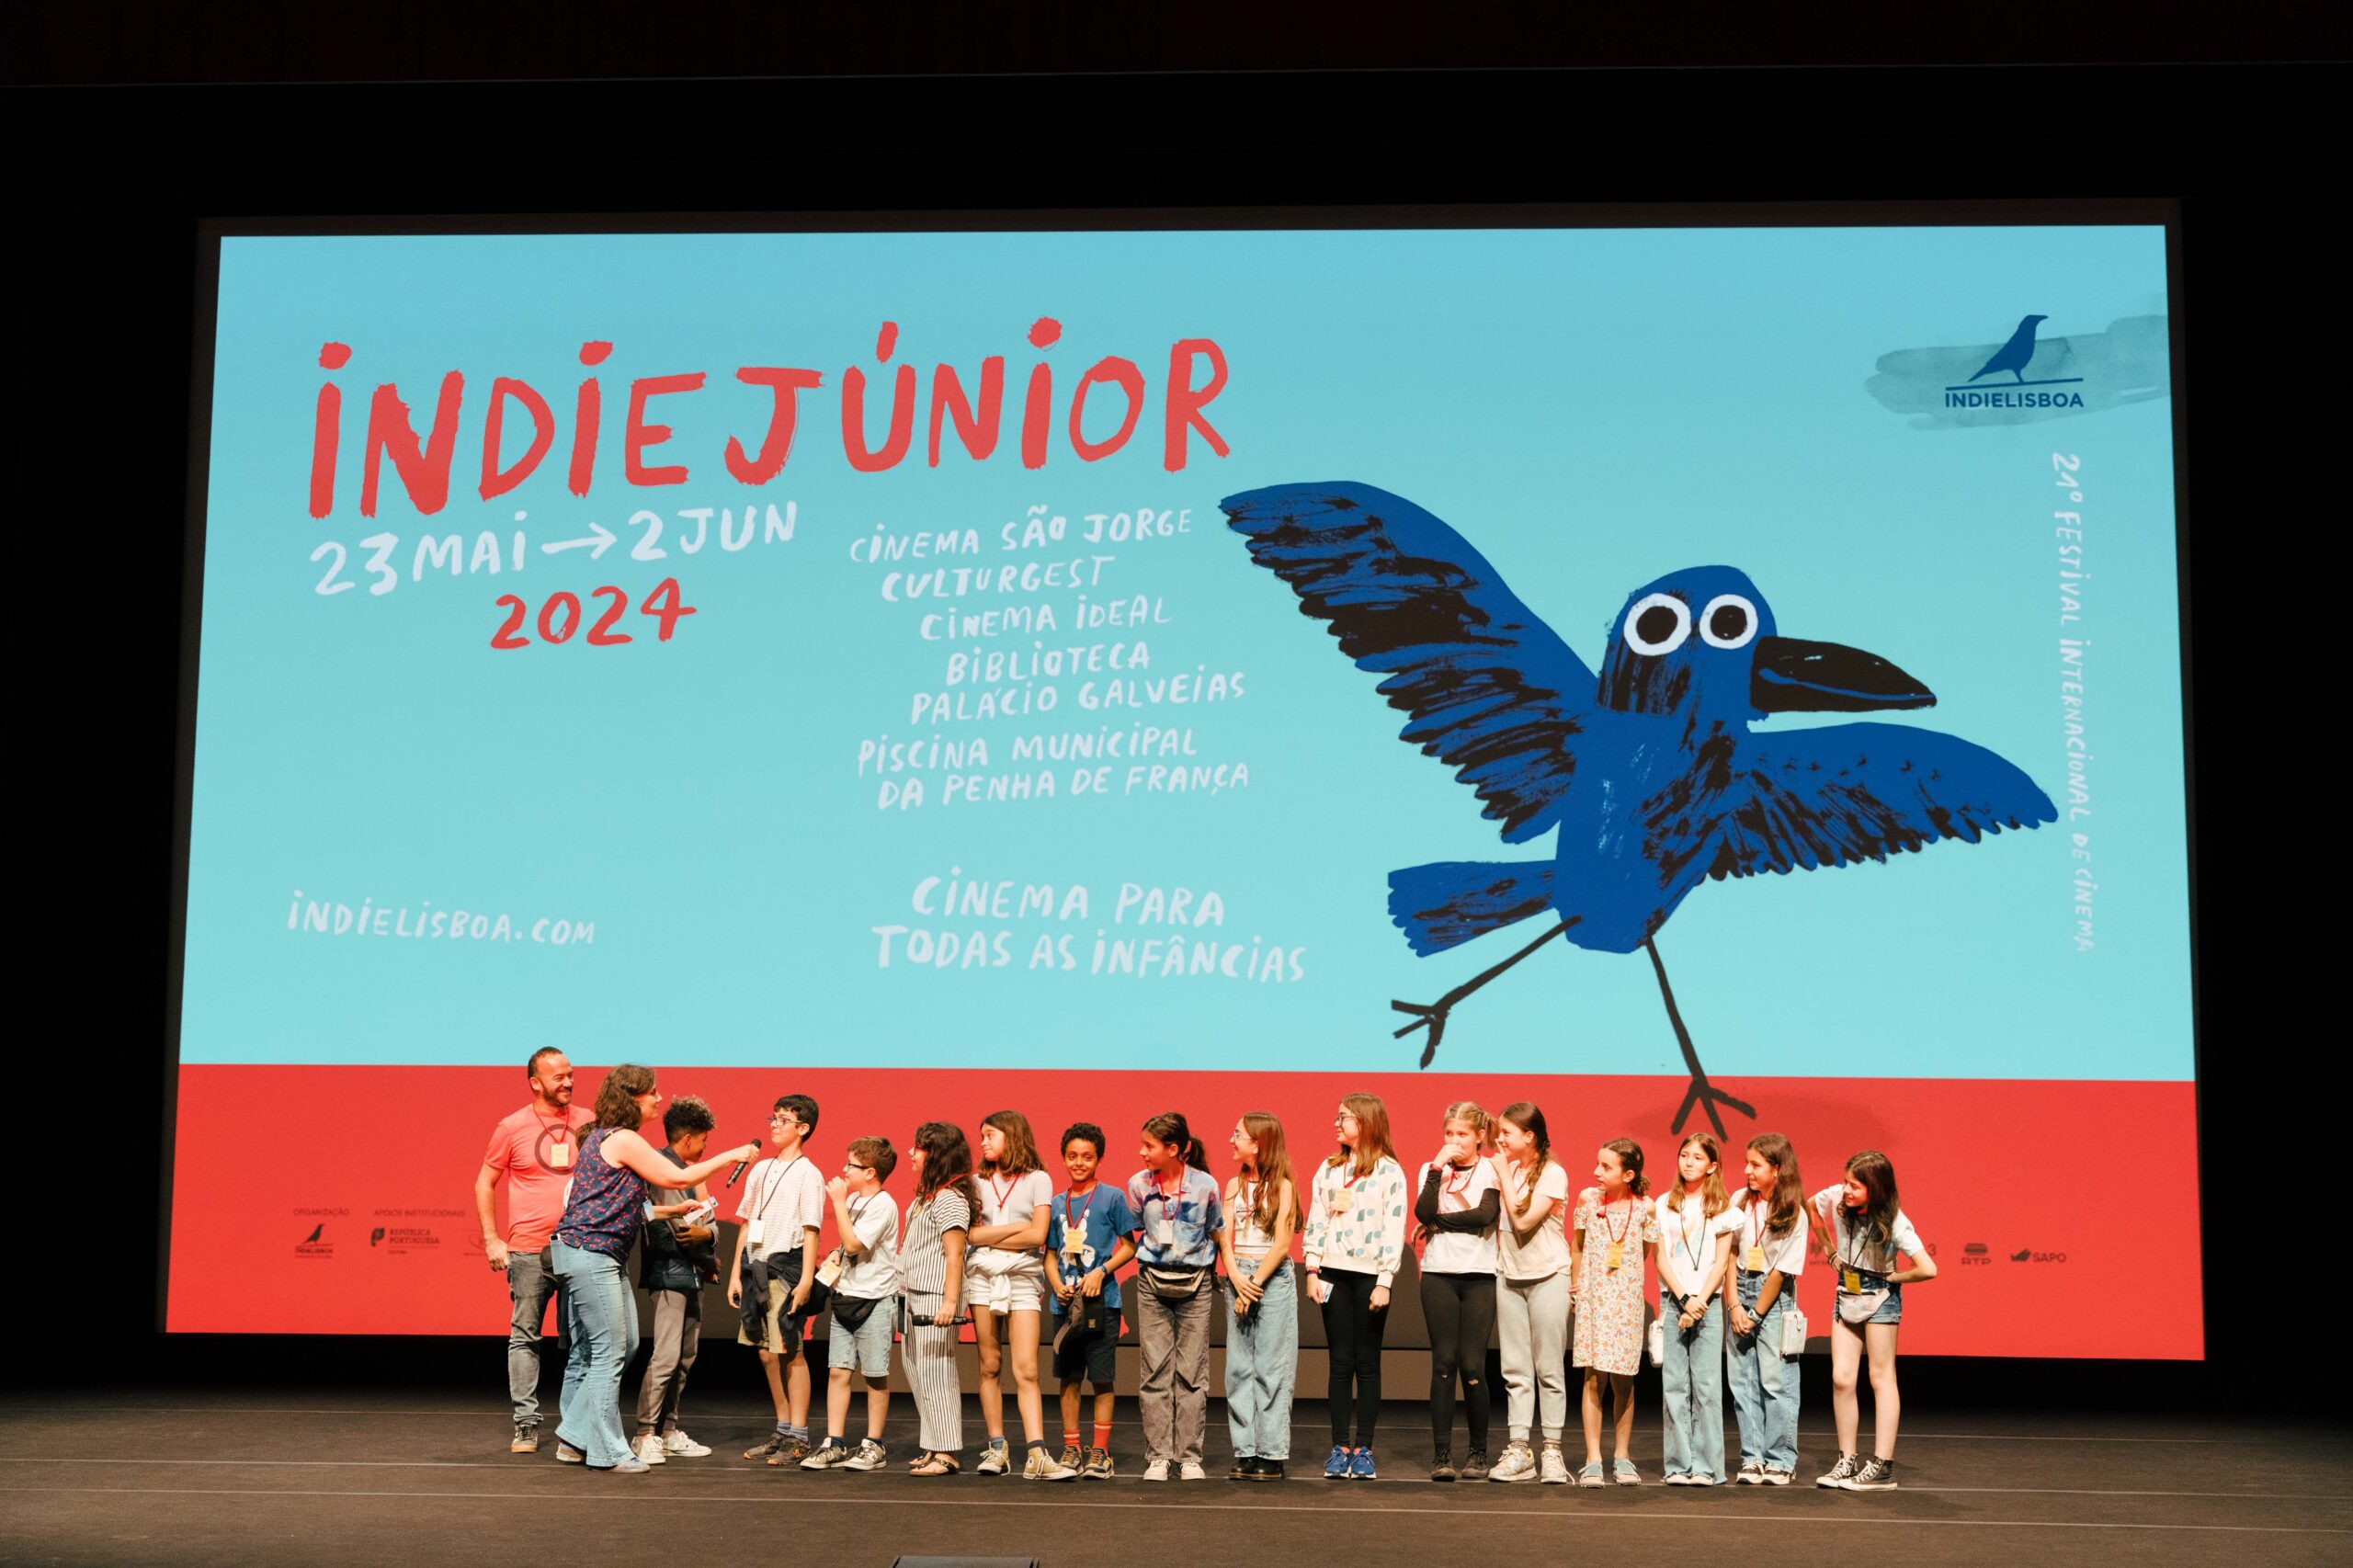 IndieLisboa See you next year! IndieJunior says goodbye, but not without saying goodbye to you.